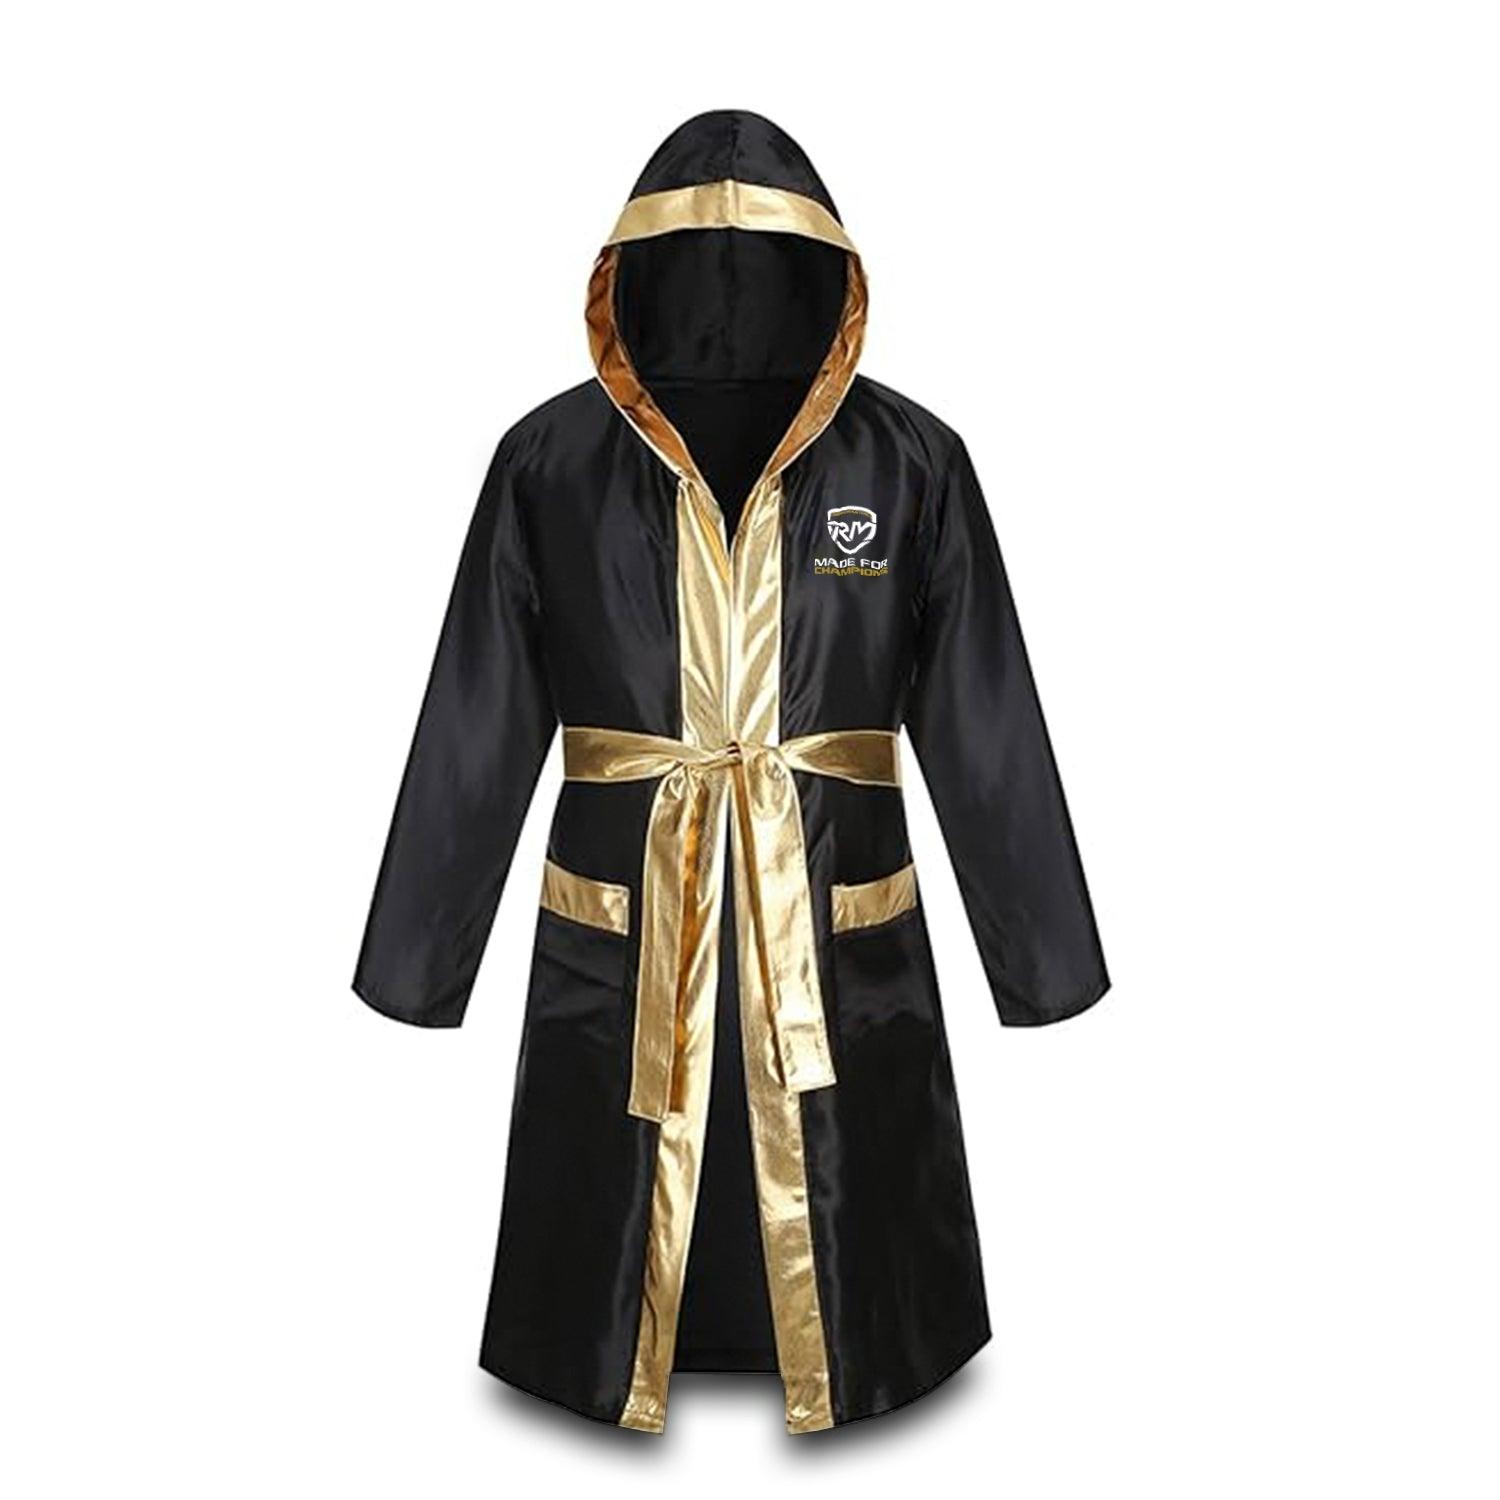 RingMaster Sports Champion Series Boxing Fight Robe Black & Gold Gown Image 1